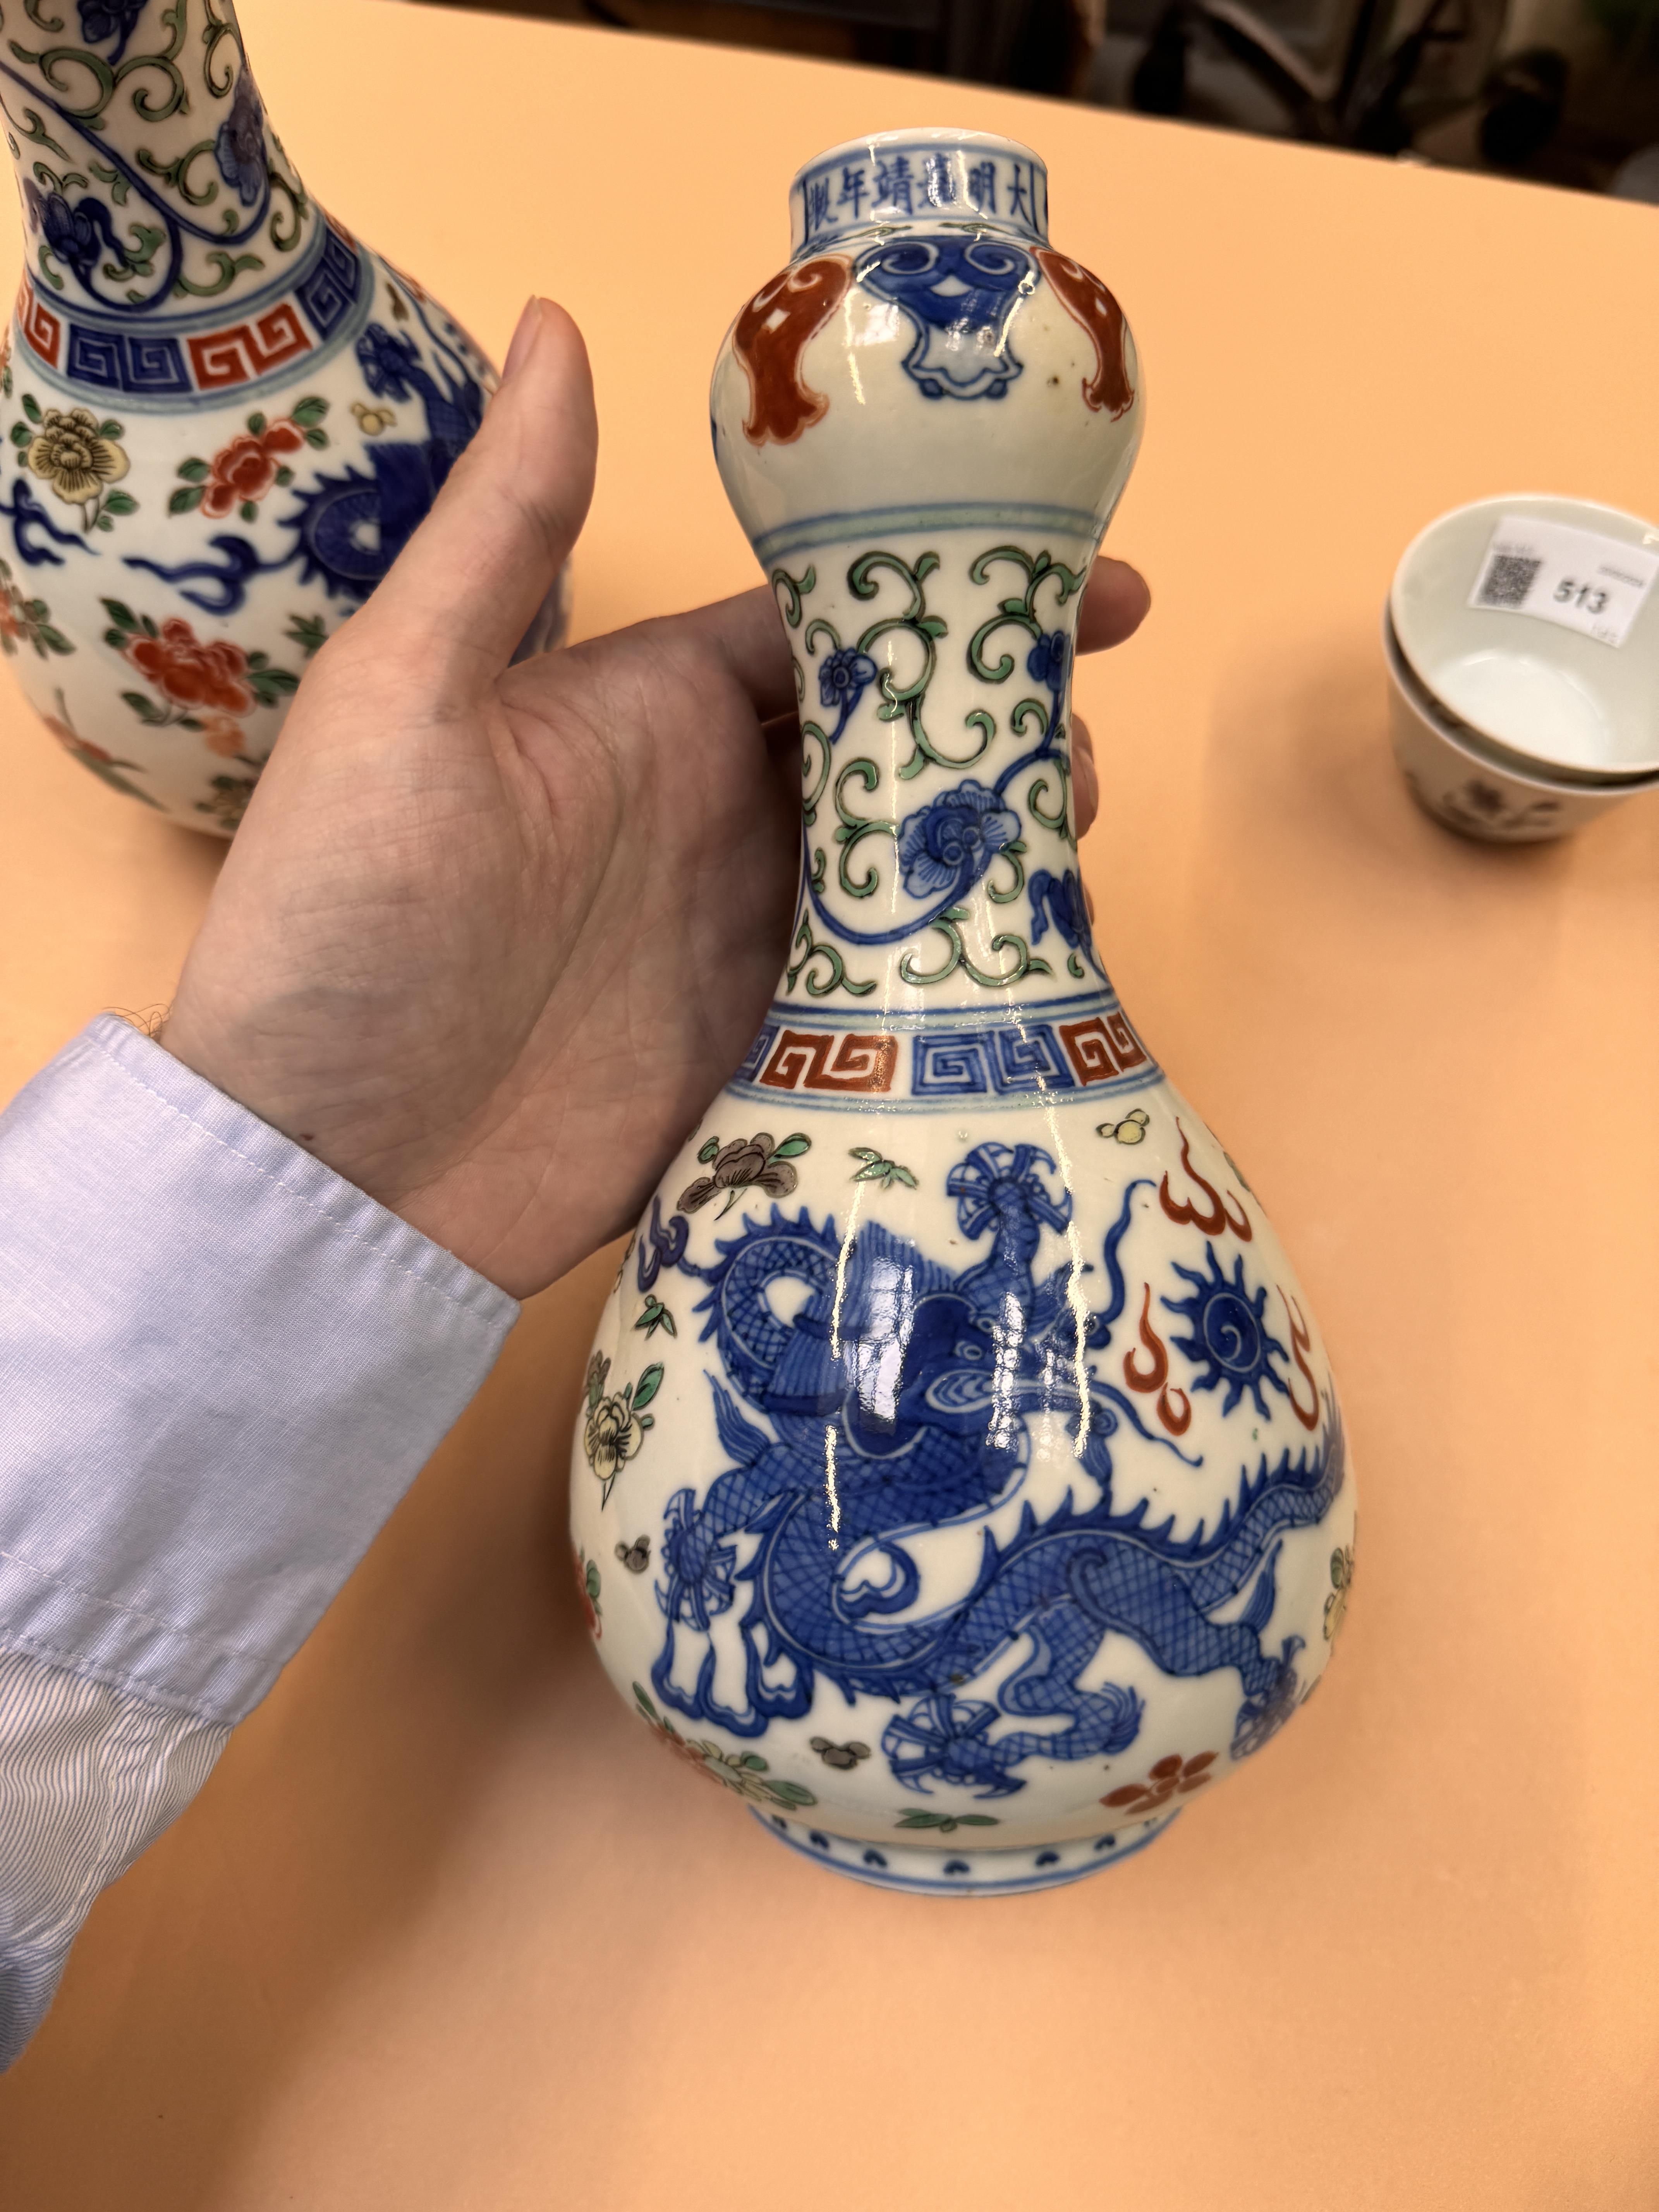 A PAIR OF CHINESE WUCAI 'DRAGON' VASES 民國時期 五彩龍趕珠紋瓶一對 《大明嘉靖年製》款 - Image 10 of 19